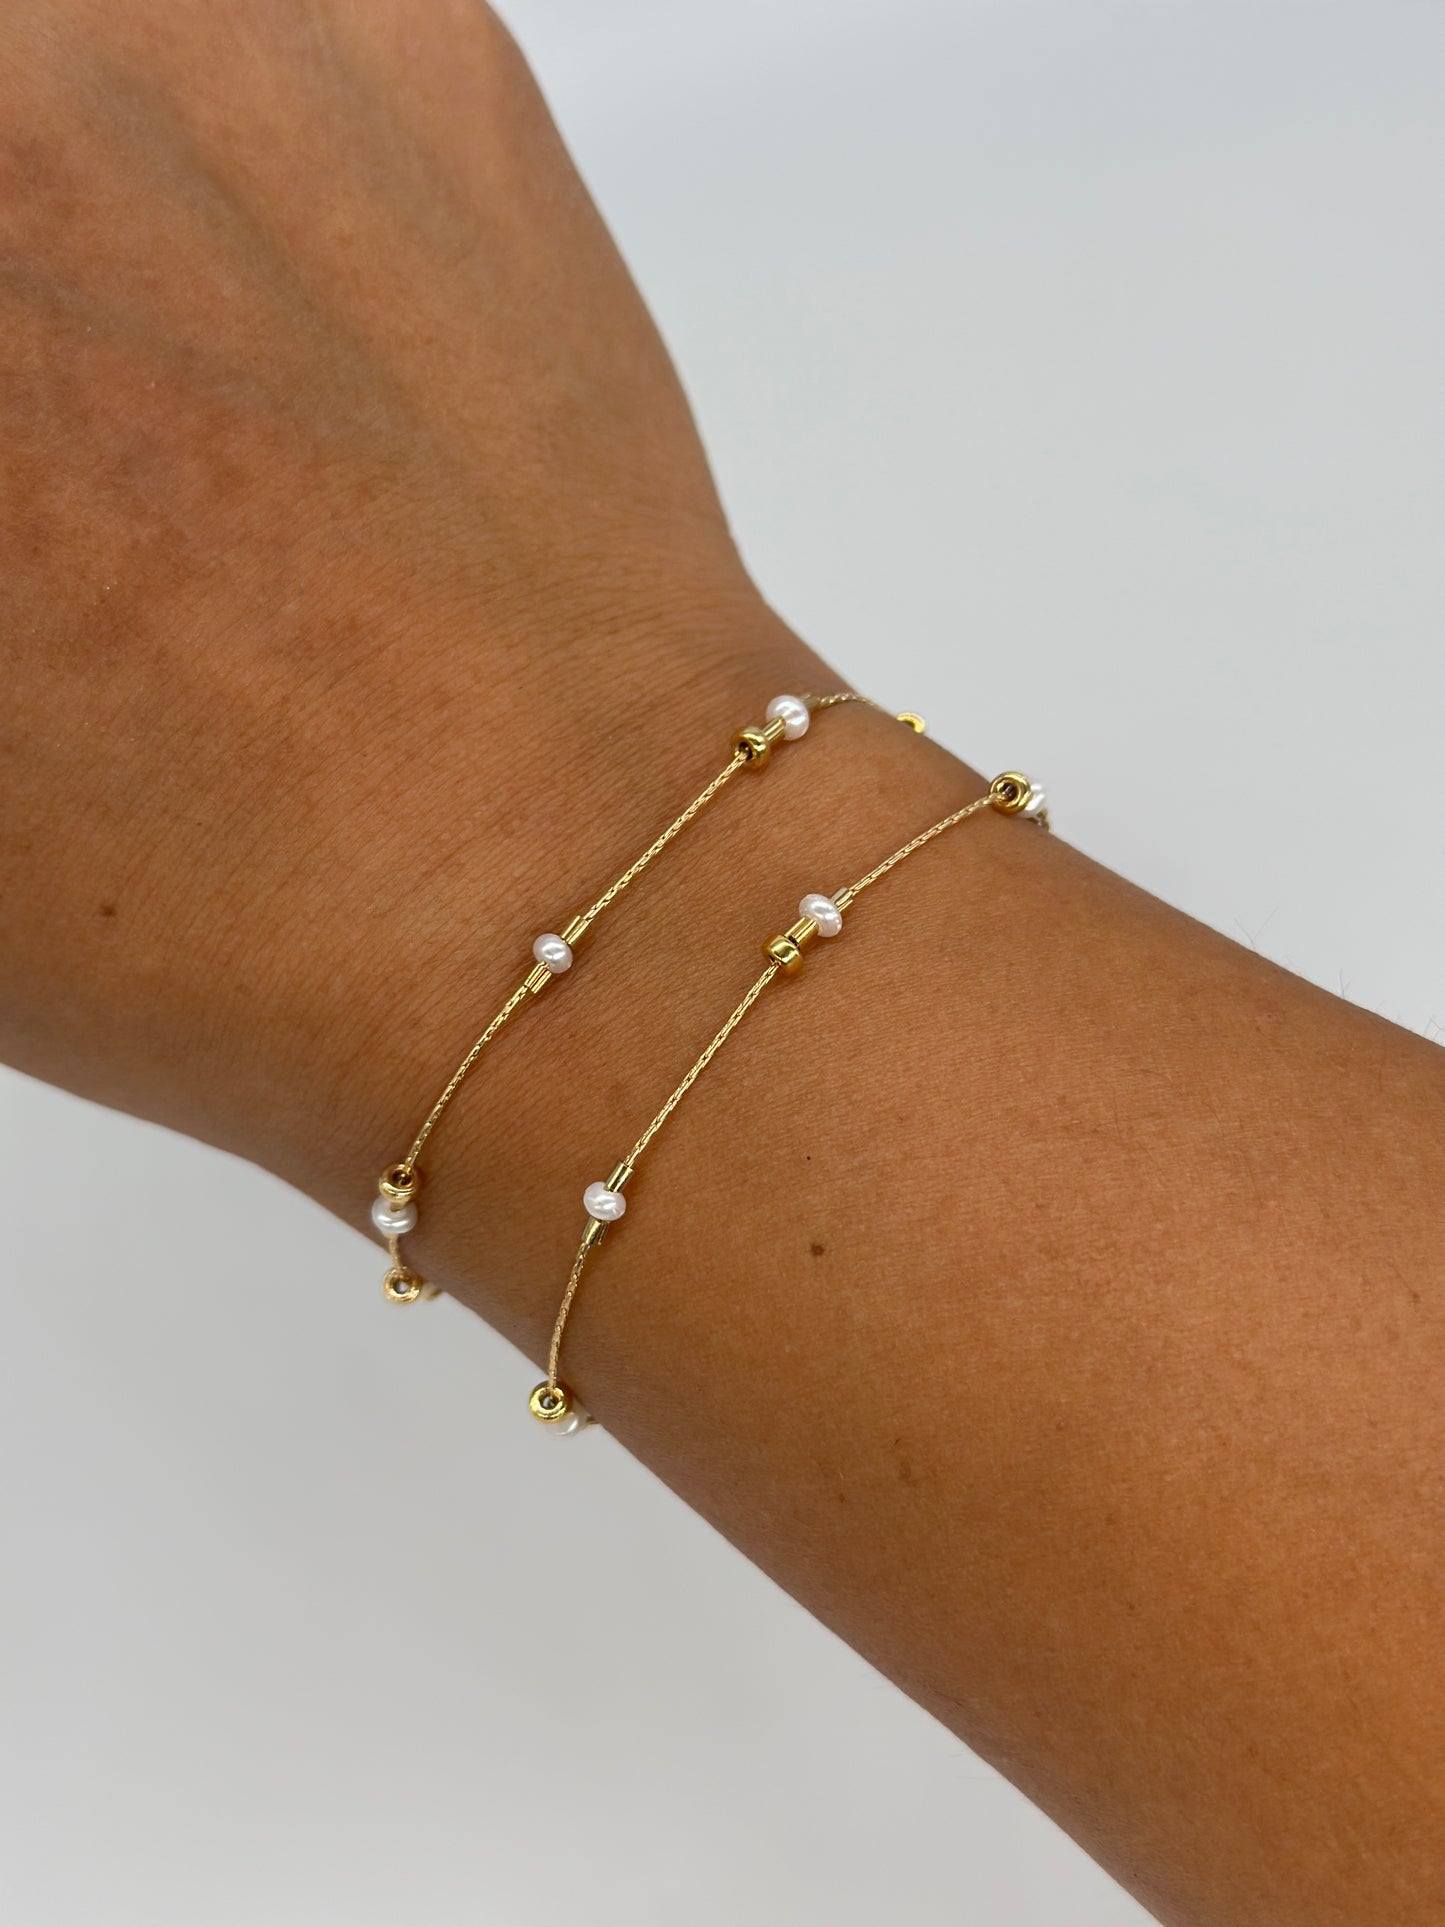 A dainty take on a pearl bracelet. Gold beads float freely in between dainty pearls.   1" extender 14k gold fill  made in Los Angeles  pearls vary in shape and size